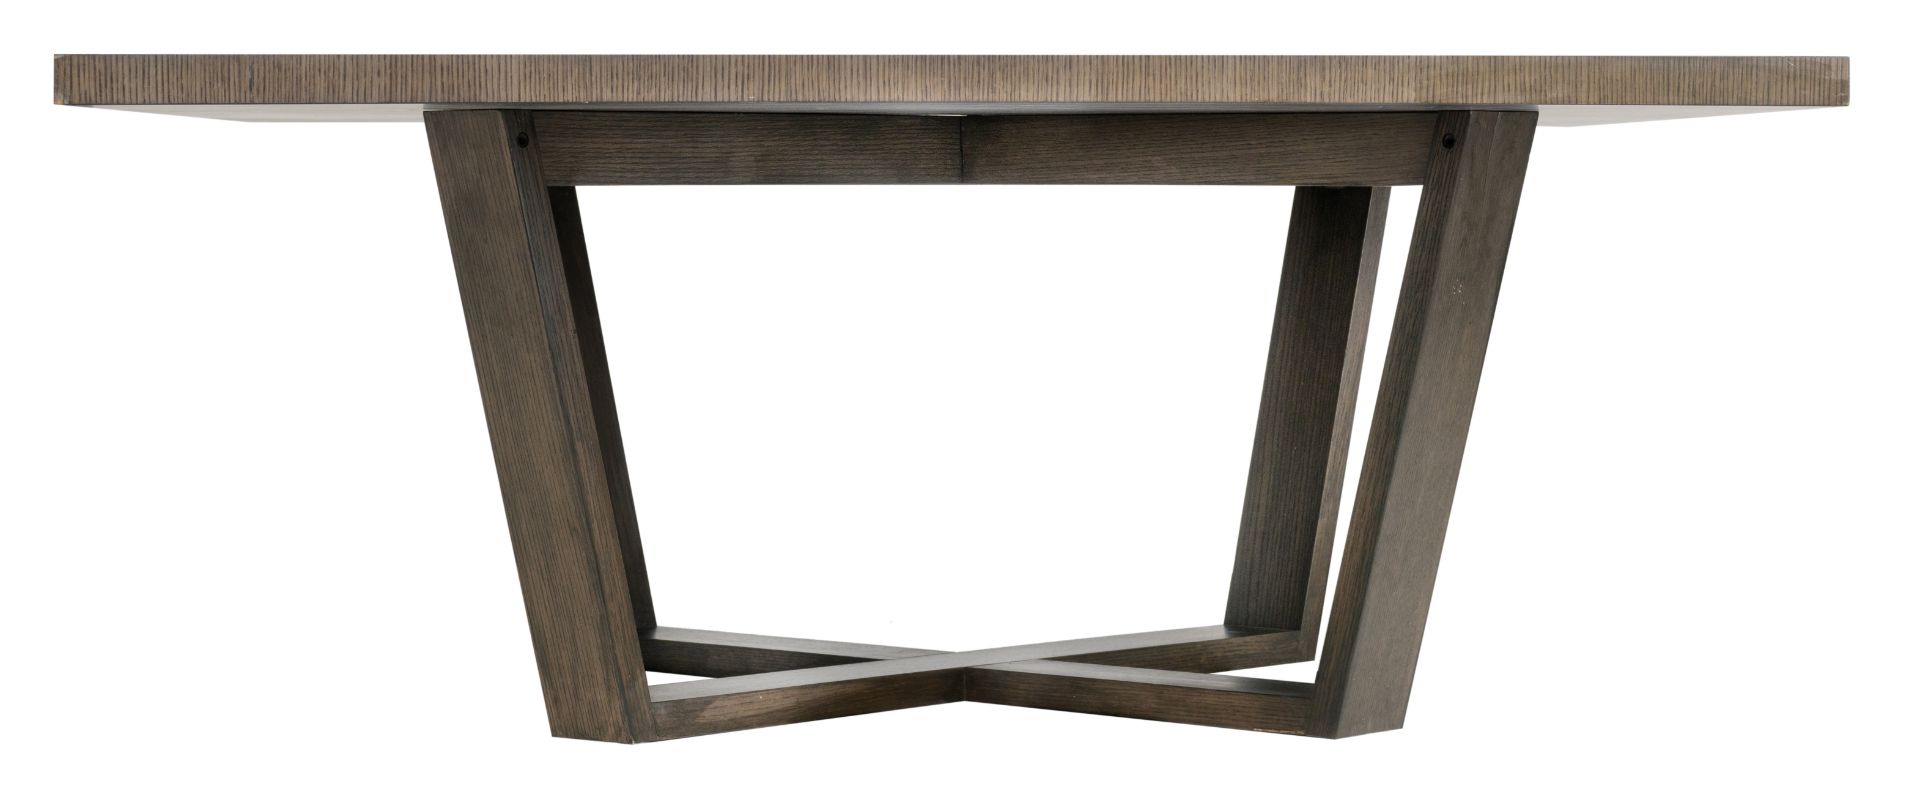 A square 'Xilos' dining table, by Antonio Citterio for B&B Italia, H 178 - W 73 cm - Image 2 of 13